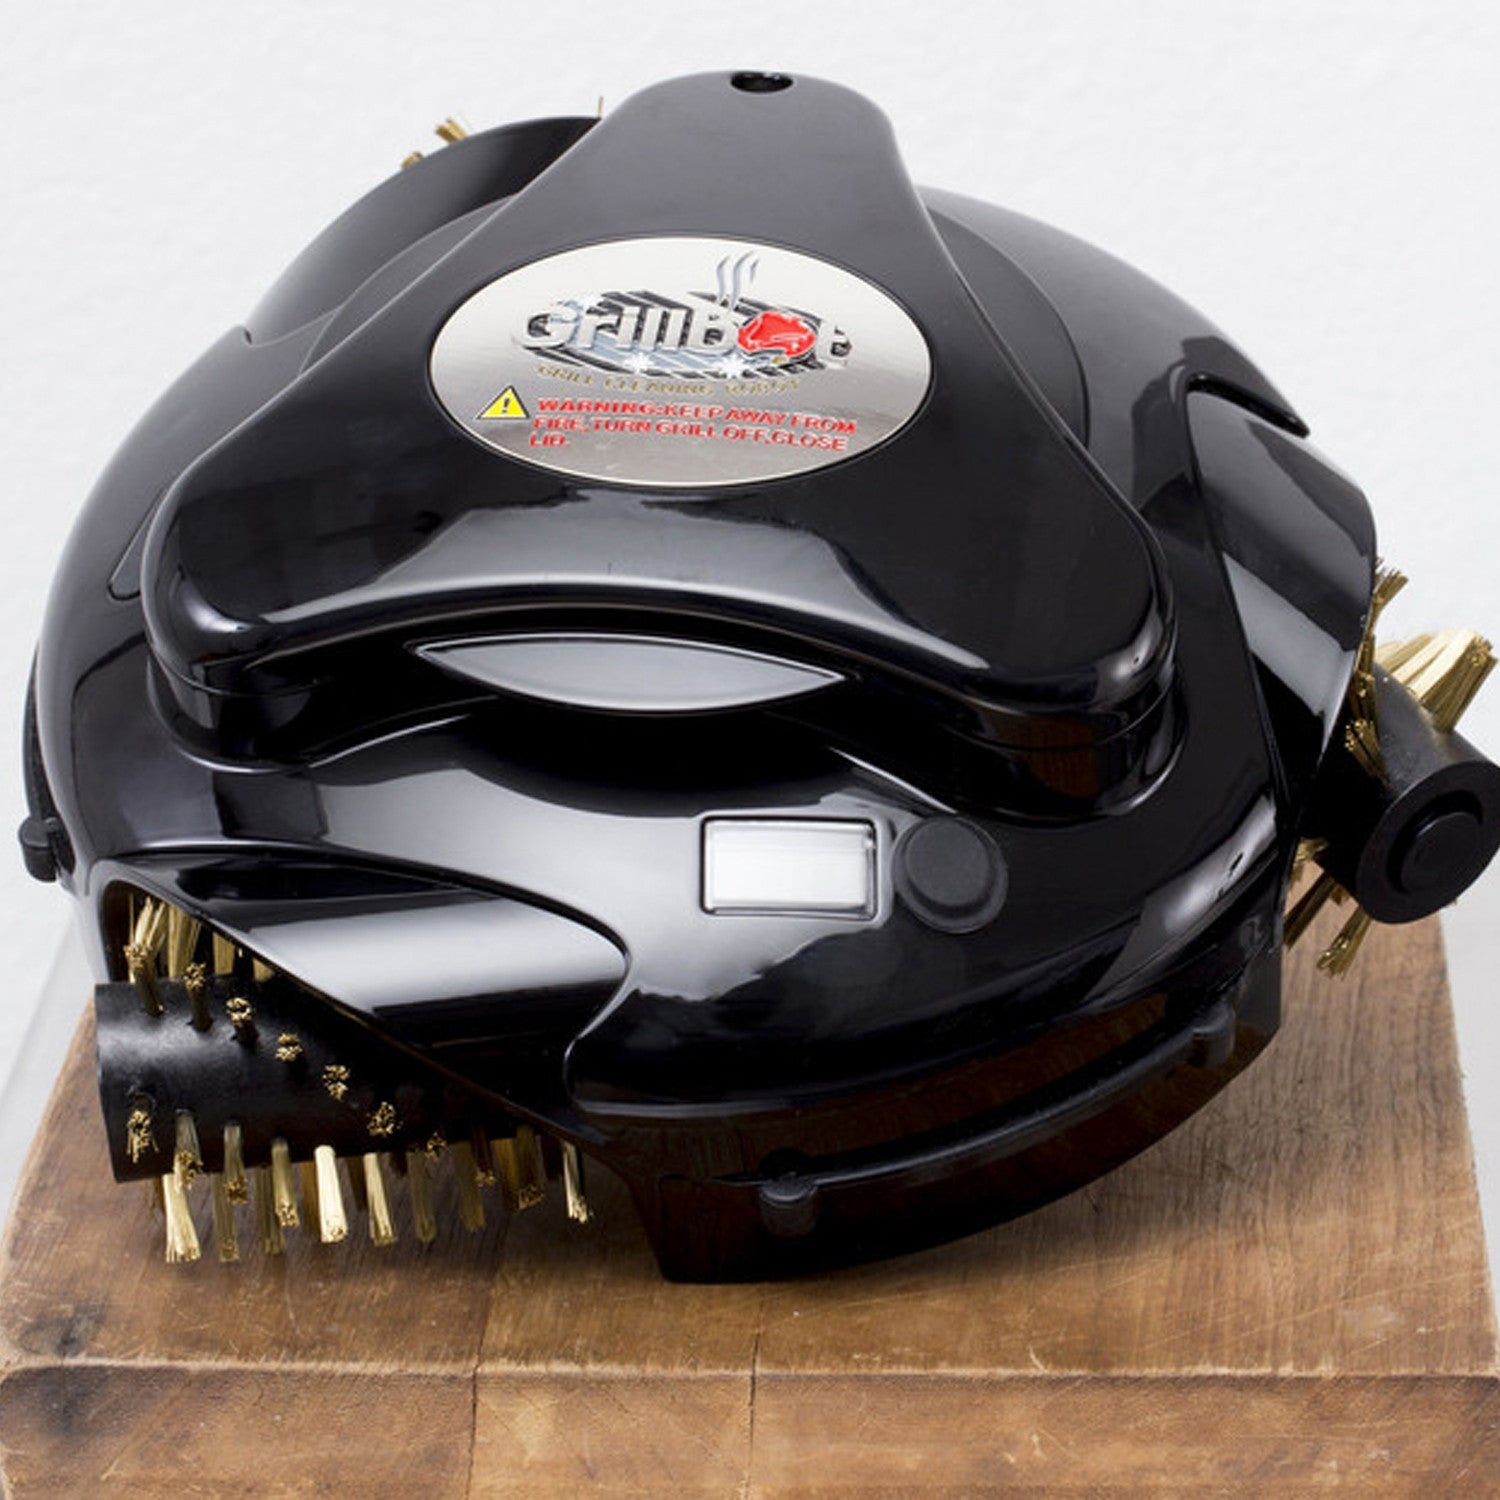 Black Grillbot Automatic grill cleaner